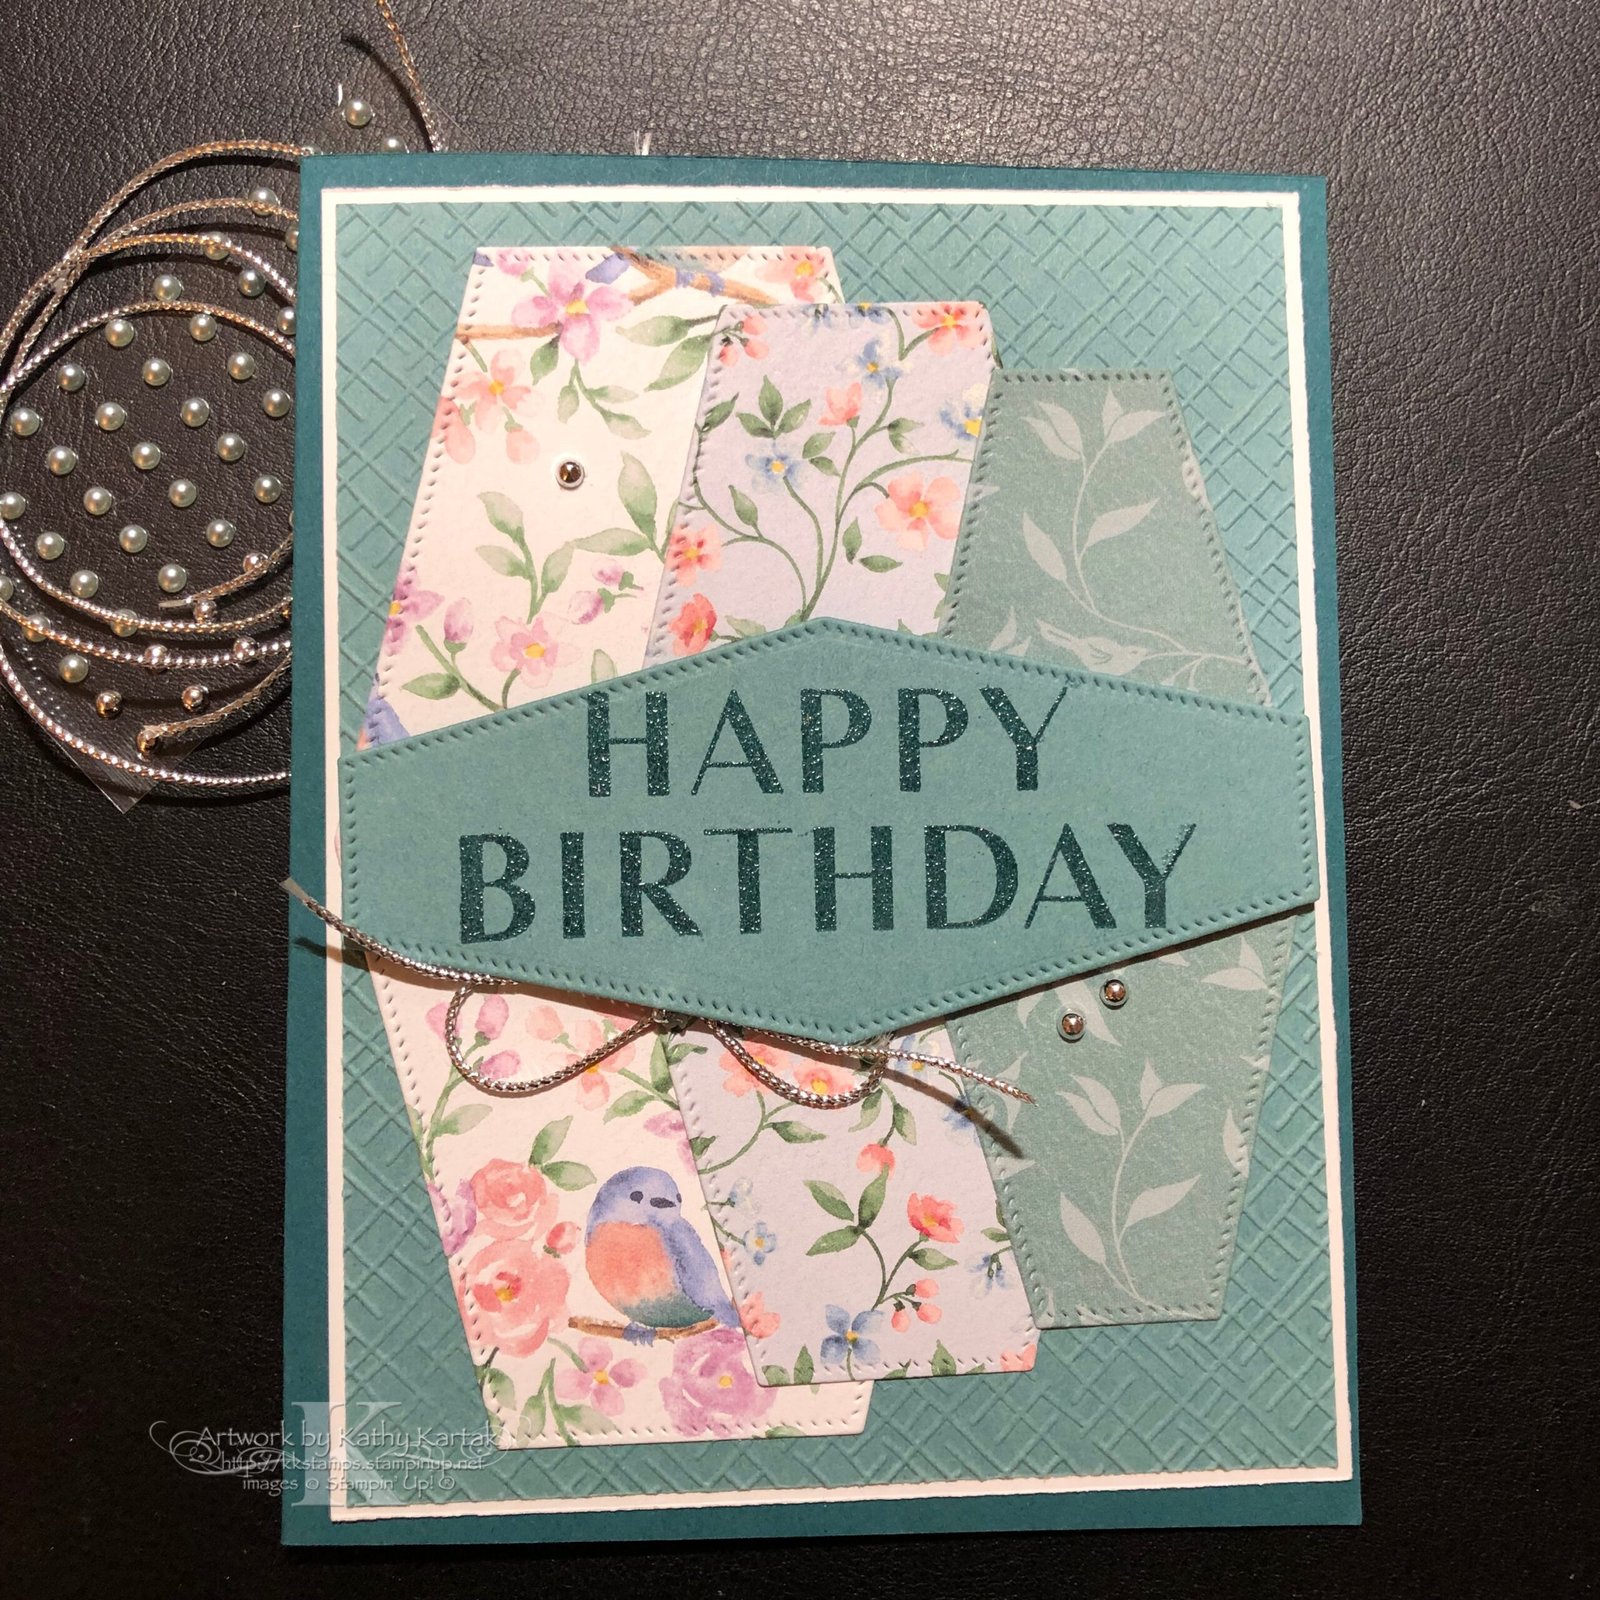 Picture of a birthday card using Stampin' Up's Flight & Airy Designer Series Paper and Phrases for All stamp set.